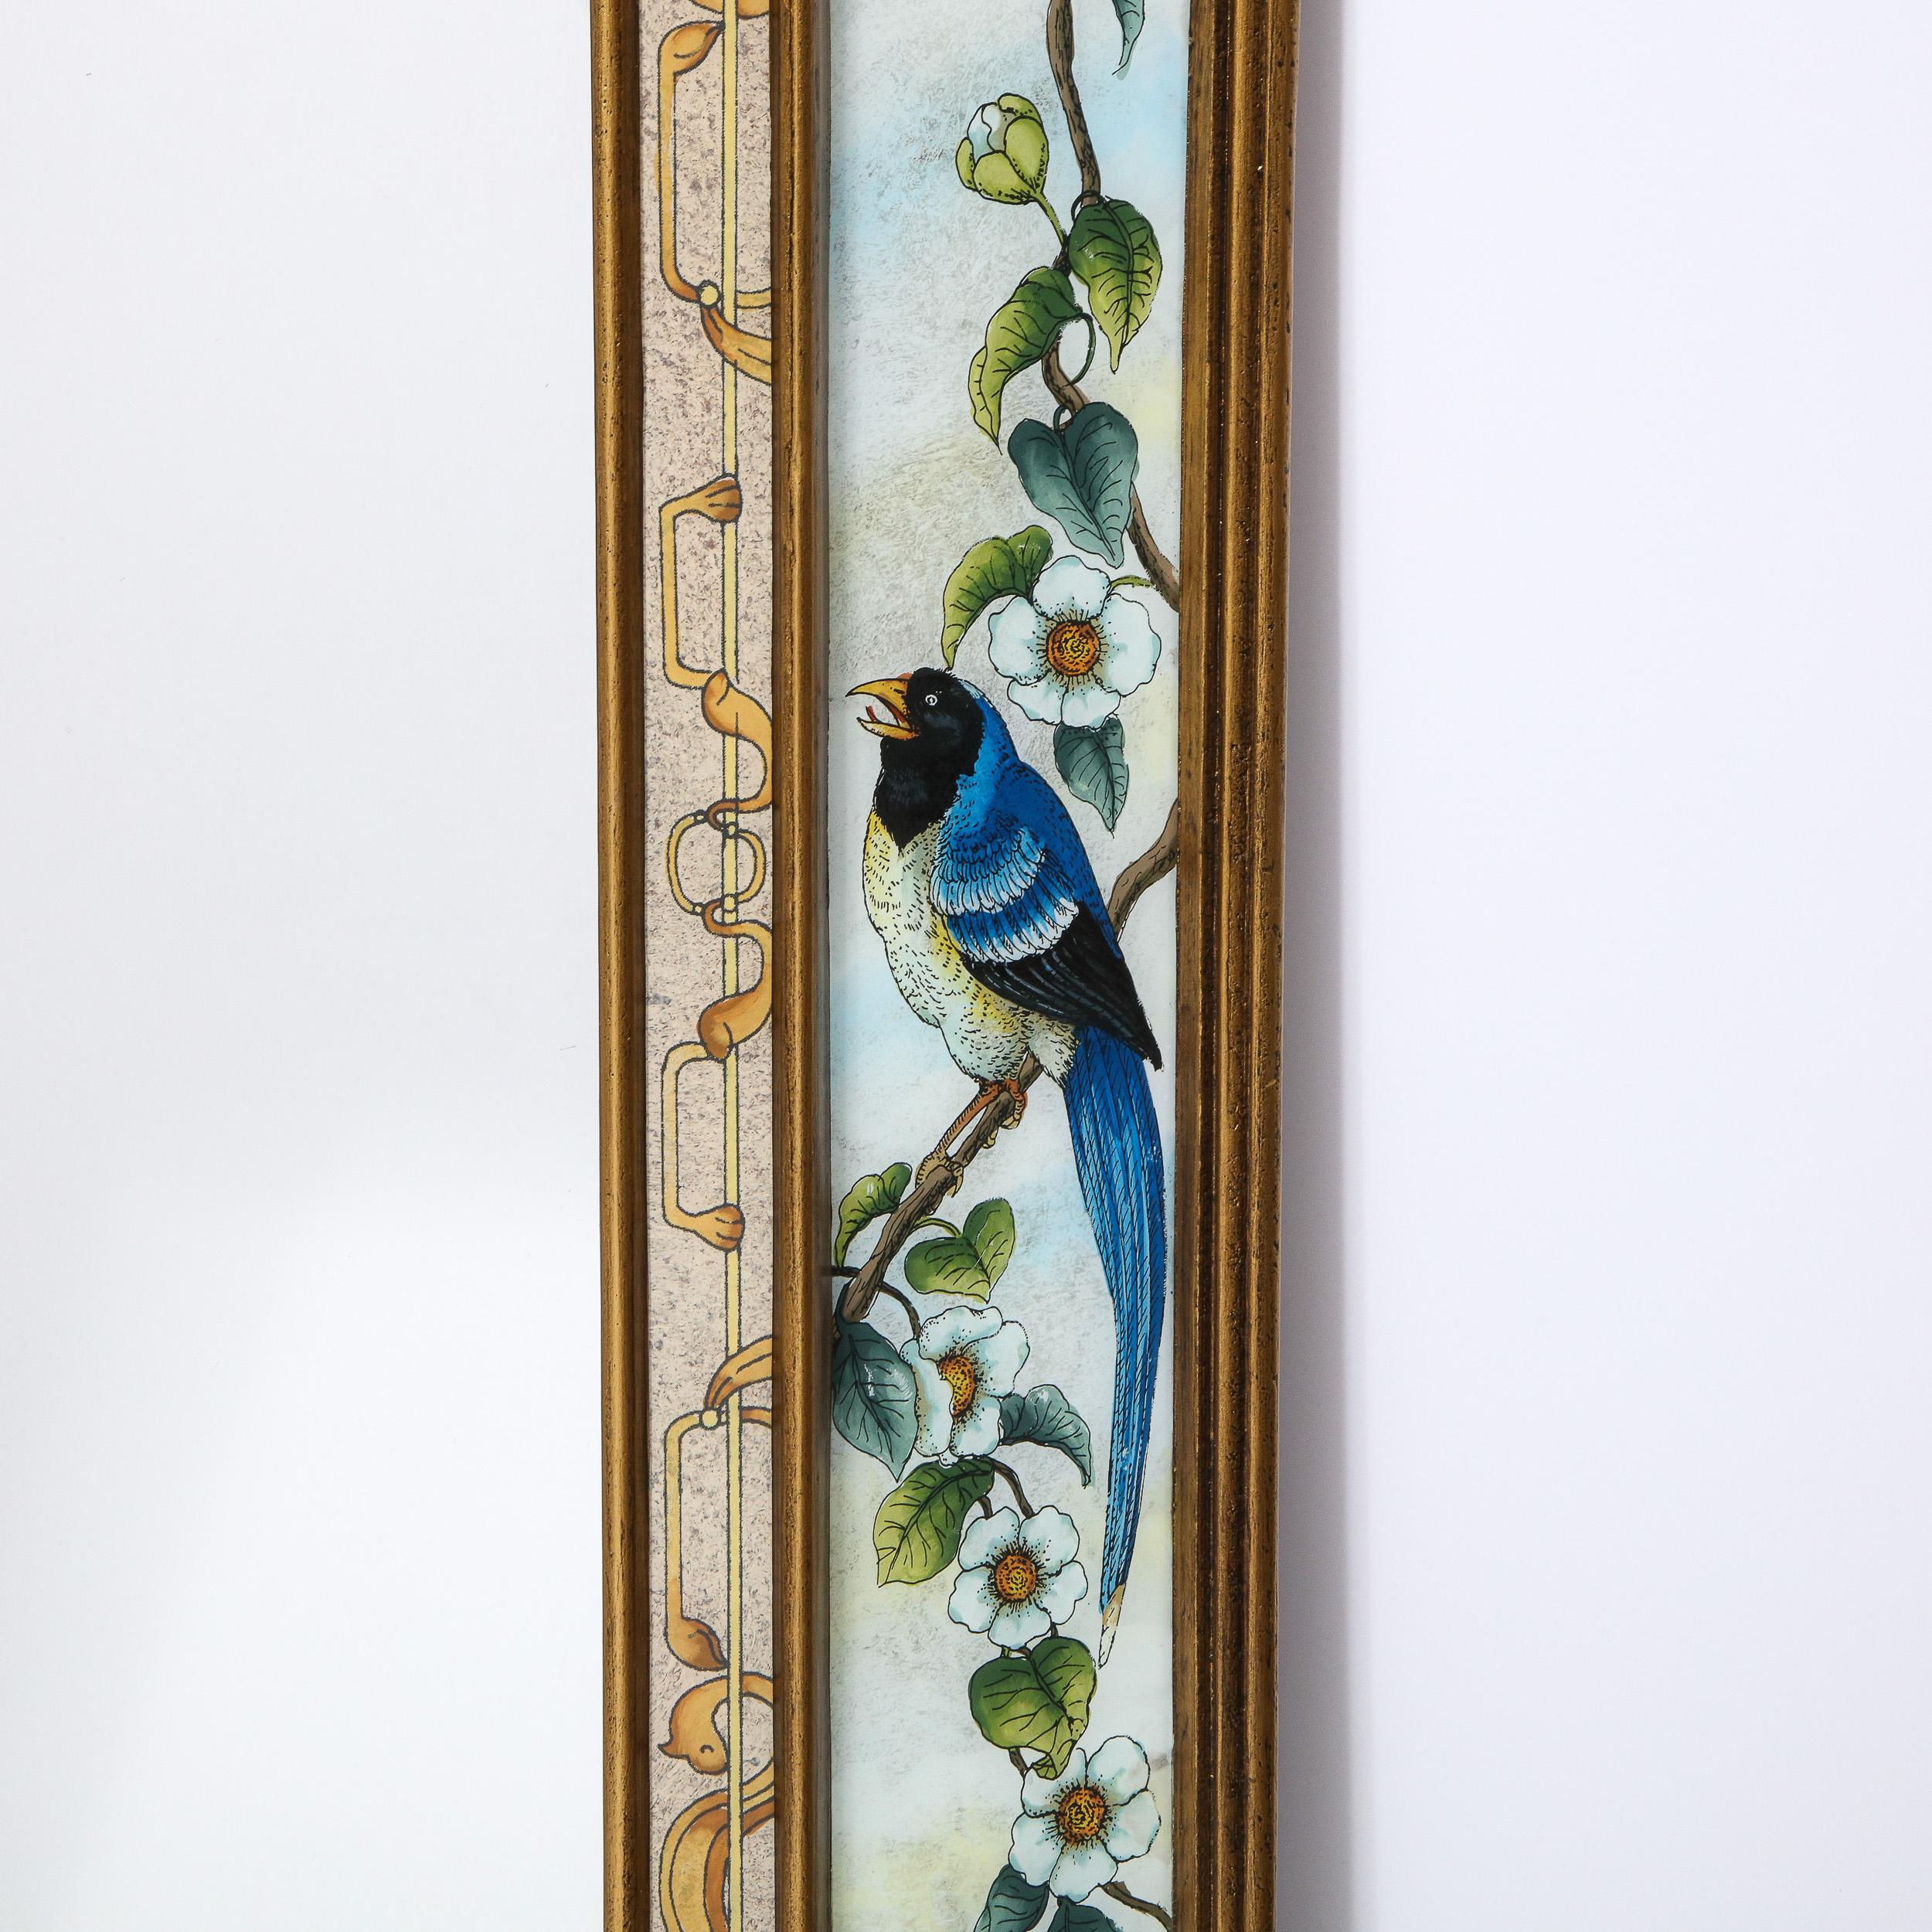 Mid-20th Century Mid-Century Modern Reverse Eglomise Painted Mirror with Stylized Flora and Fauna